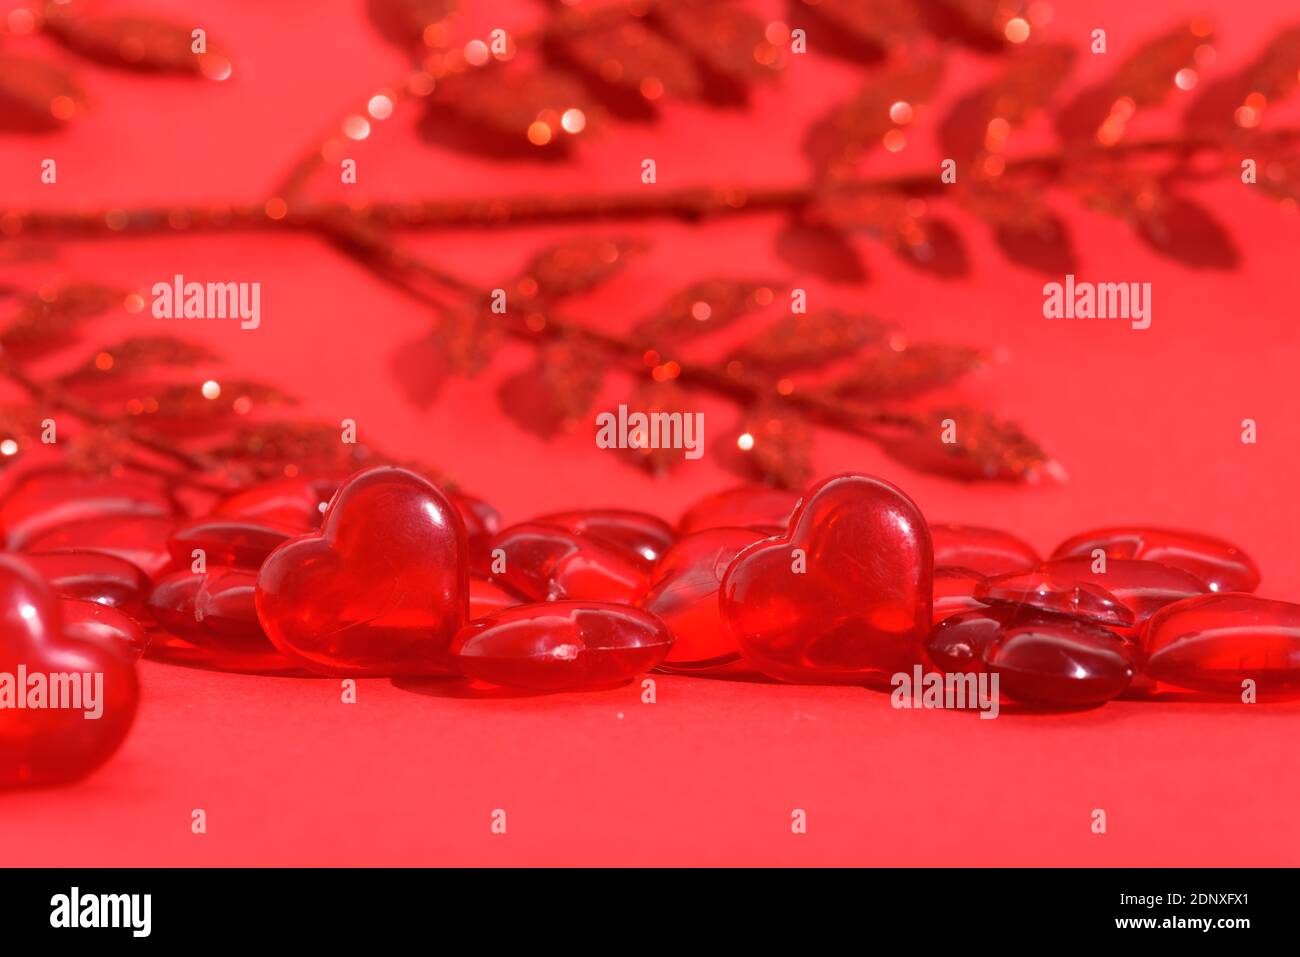 valentine's day mockup greeting card with red hearts on red background, for text place. festive wedding background, bluer focus. Stock Photo